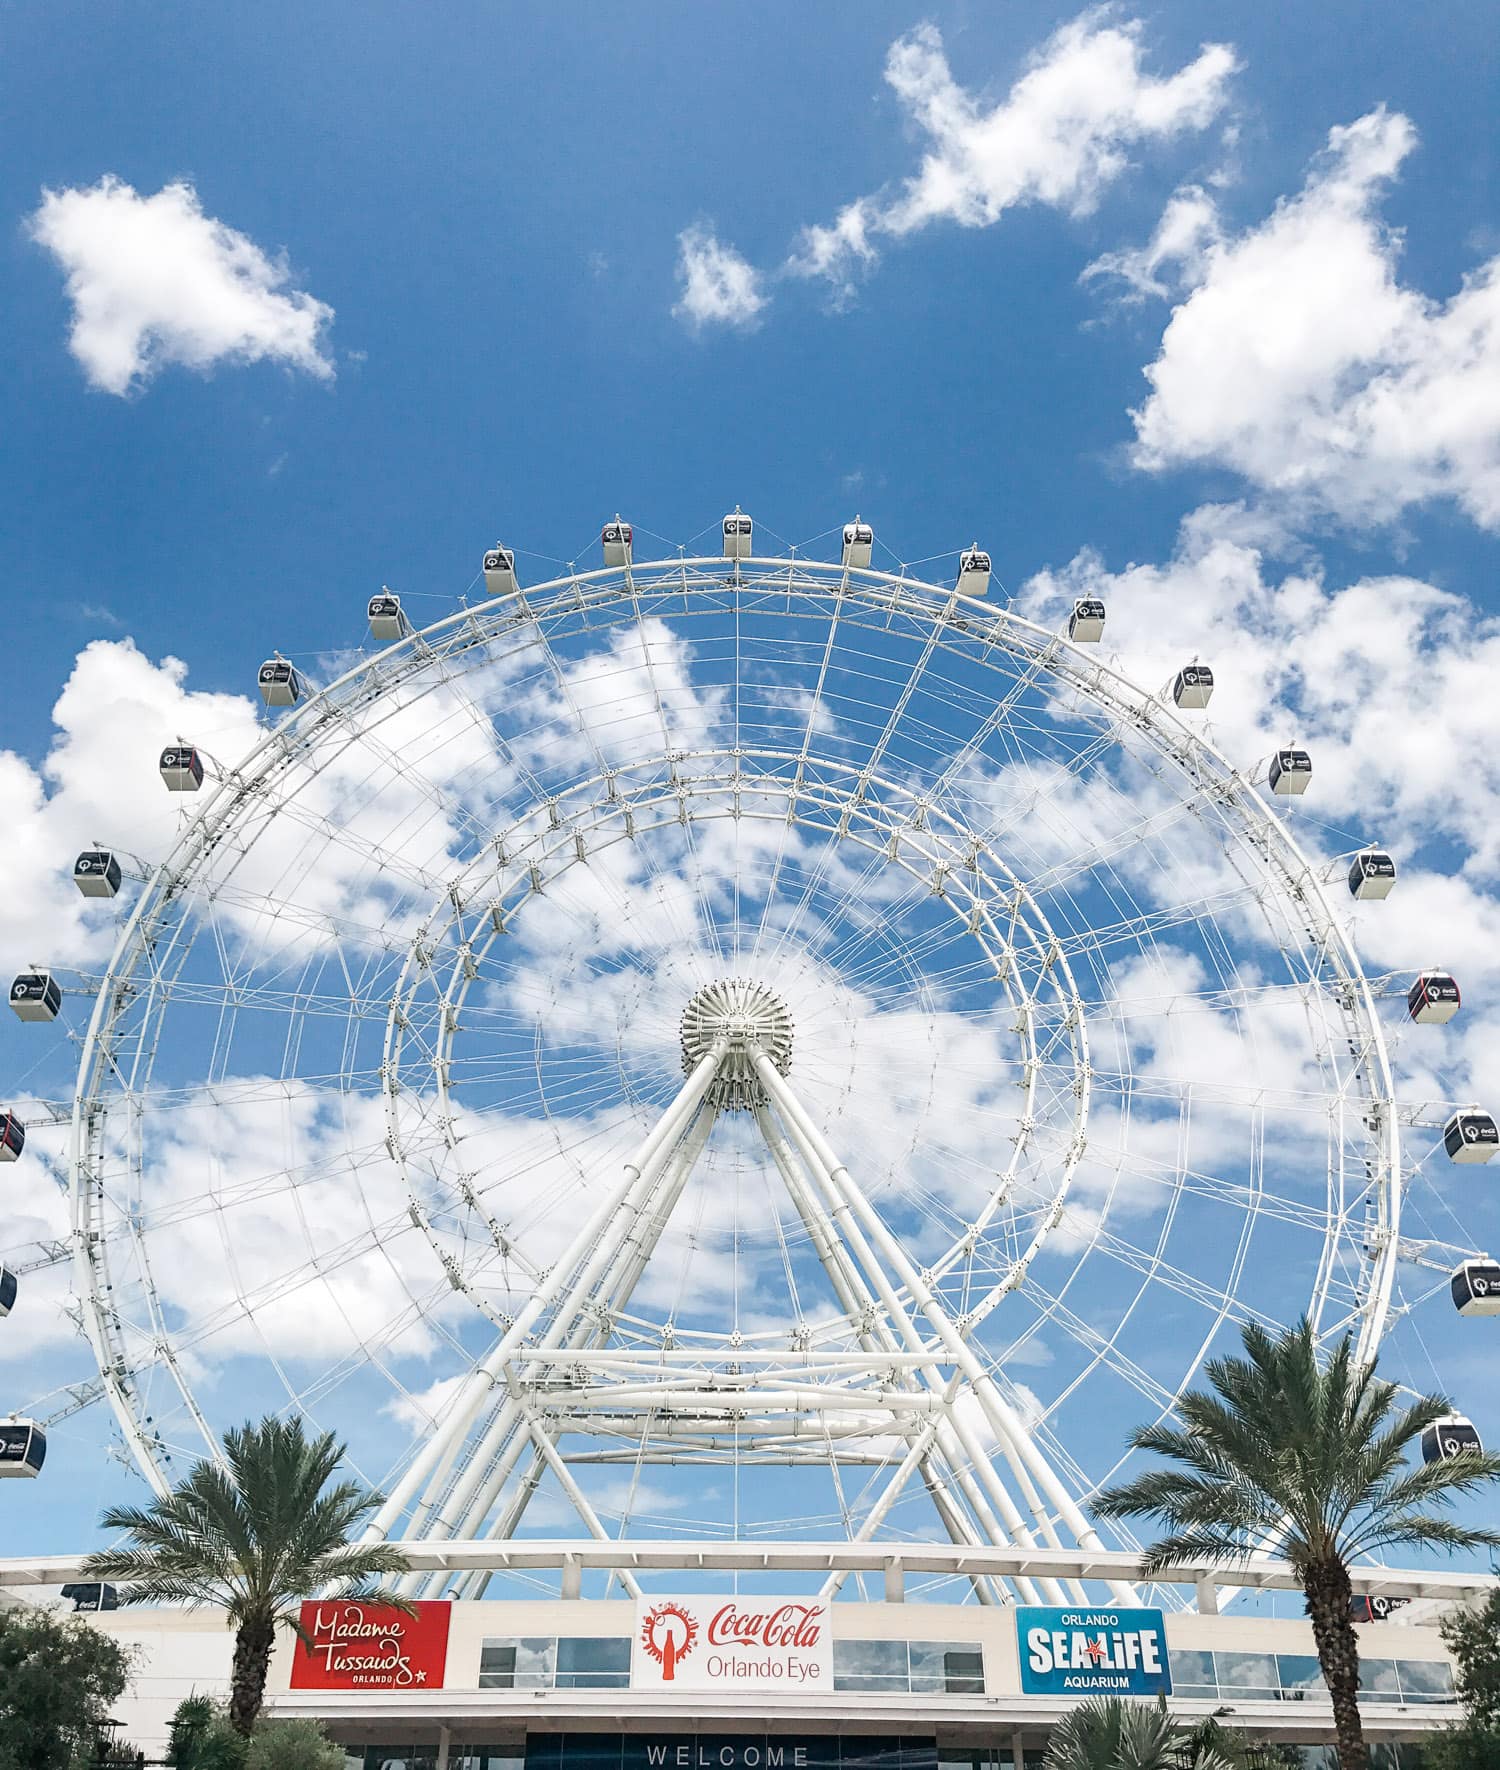 The Orlando Eye is a must-see during any trip to Orlando! Planning a trip to Orlando? I've rounded up the top 10 things to do in Orlando, Florida, that are guaranteed to make your trip a success. Whether you're moving to Orlando or just headed in on vacation, you will LOVE this list of fun activities in Orlando by Florida travel blogger Ashley Brooke Nicholas #CORTatHome sponsored by CORT Furniture | affordable travel tips, orlando vacation tips, vacation tips, florida travel, vacation goals